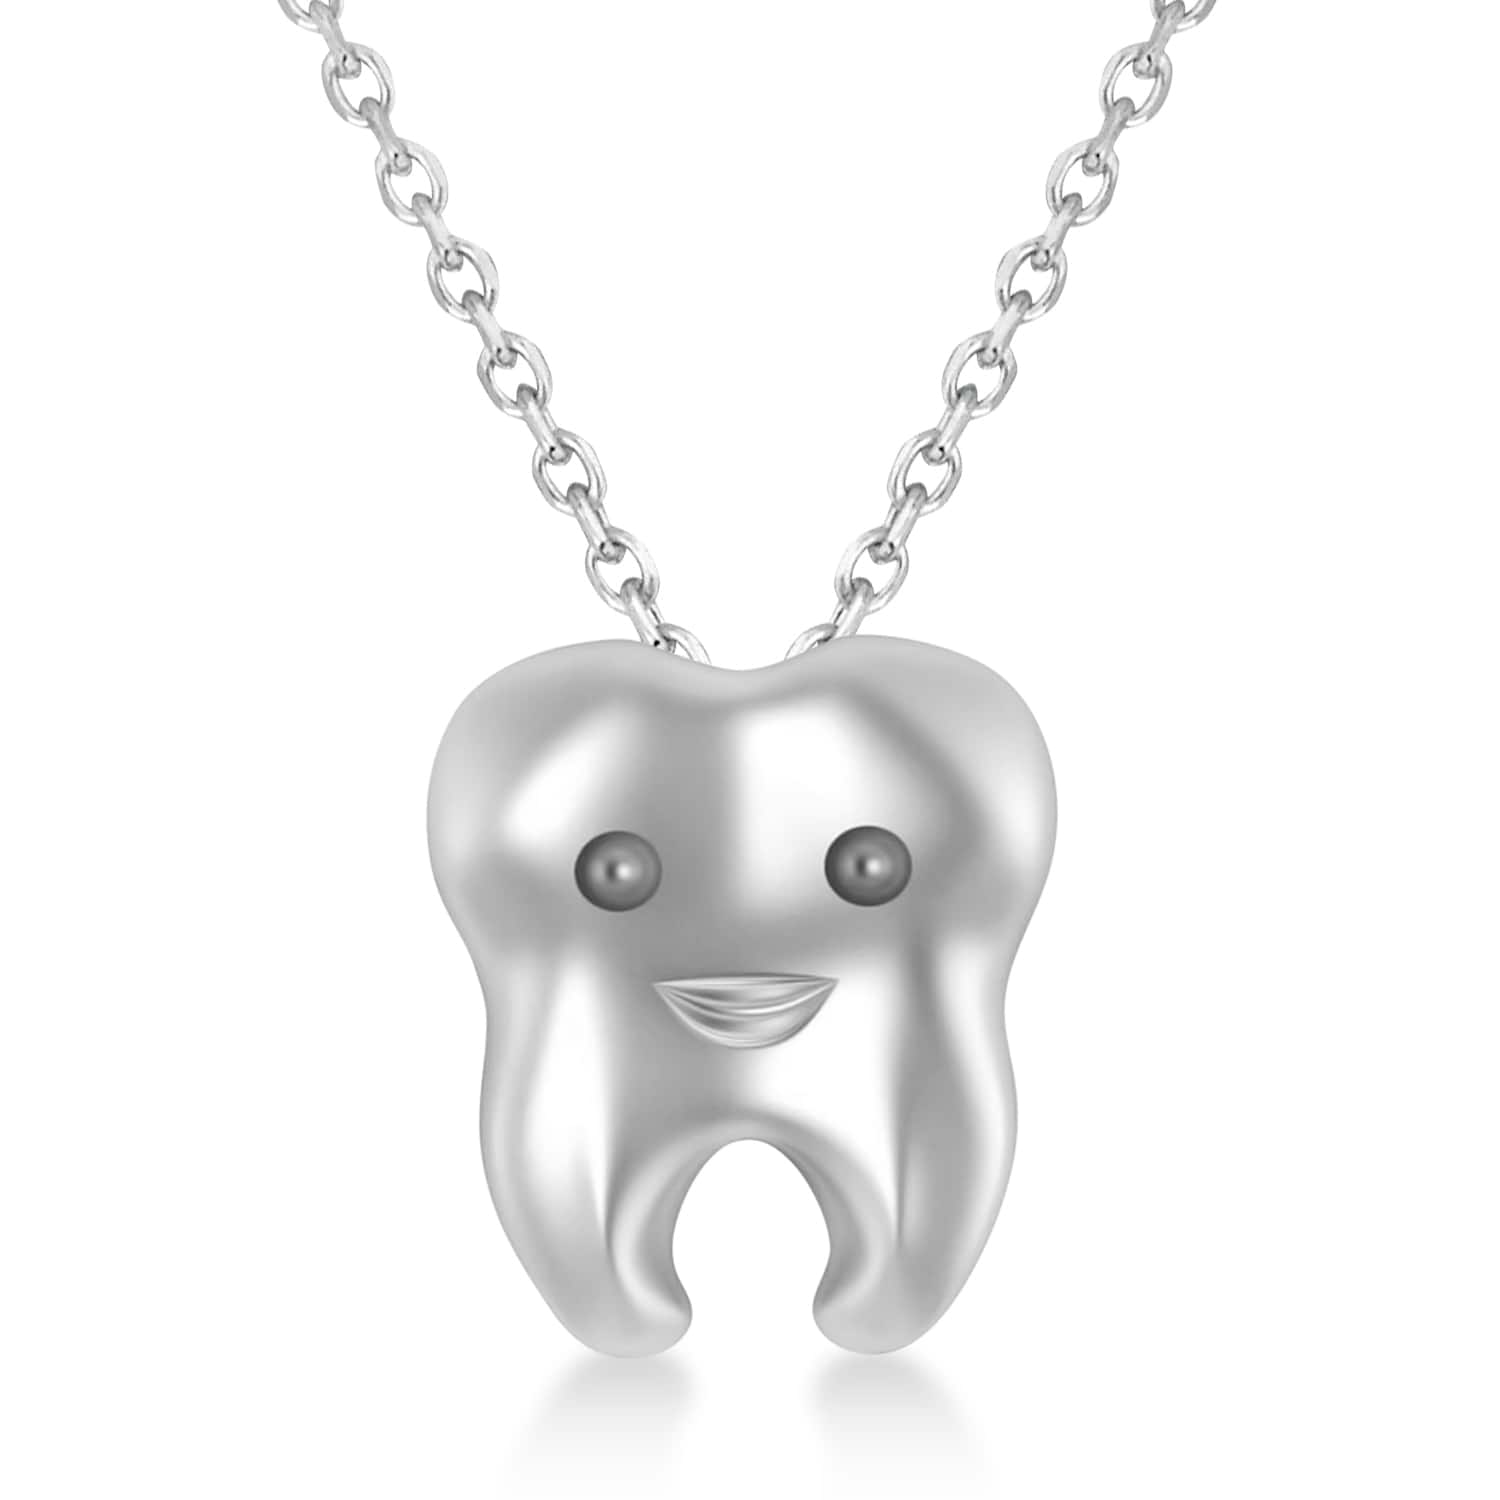 Smiling Tooth Pendant Necklace 14k White Gold